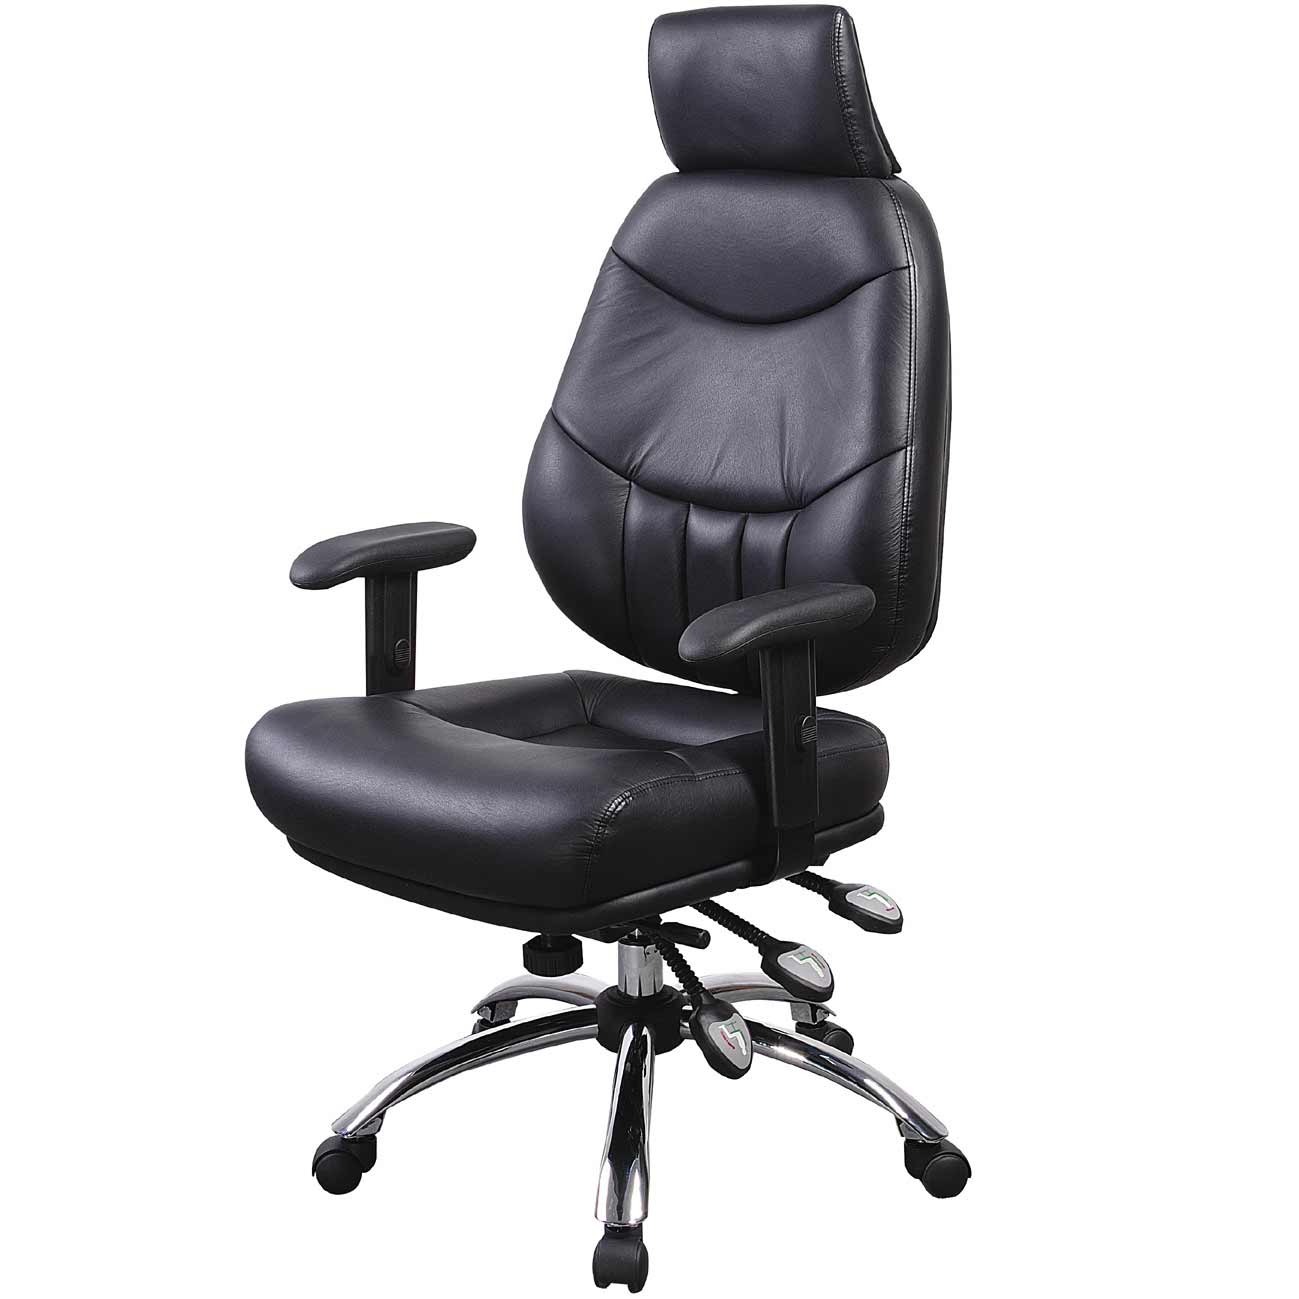 Executive Ergonomic Chair for Your Pride and Comfort